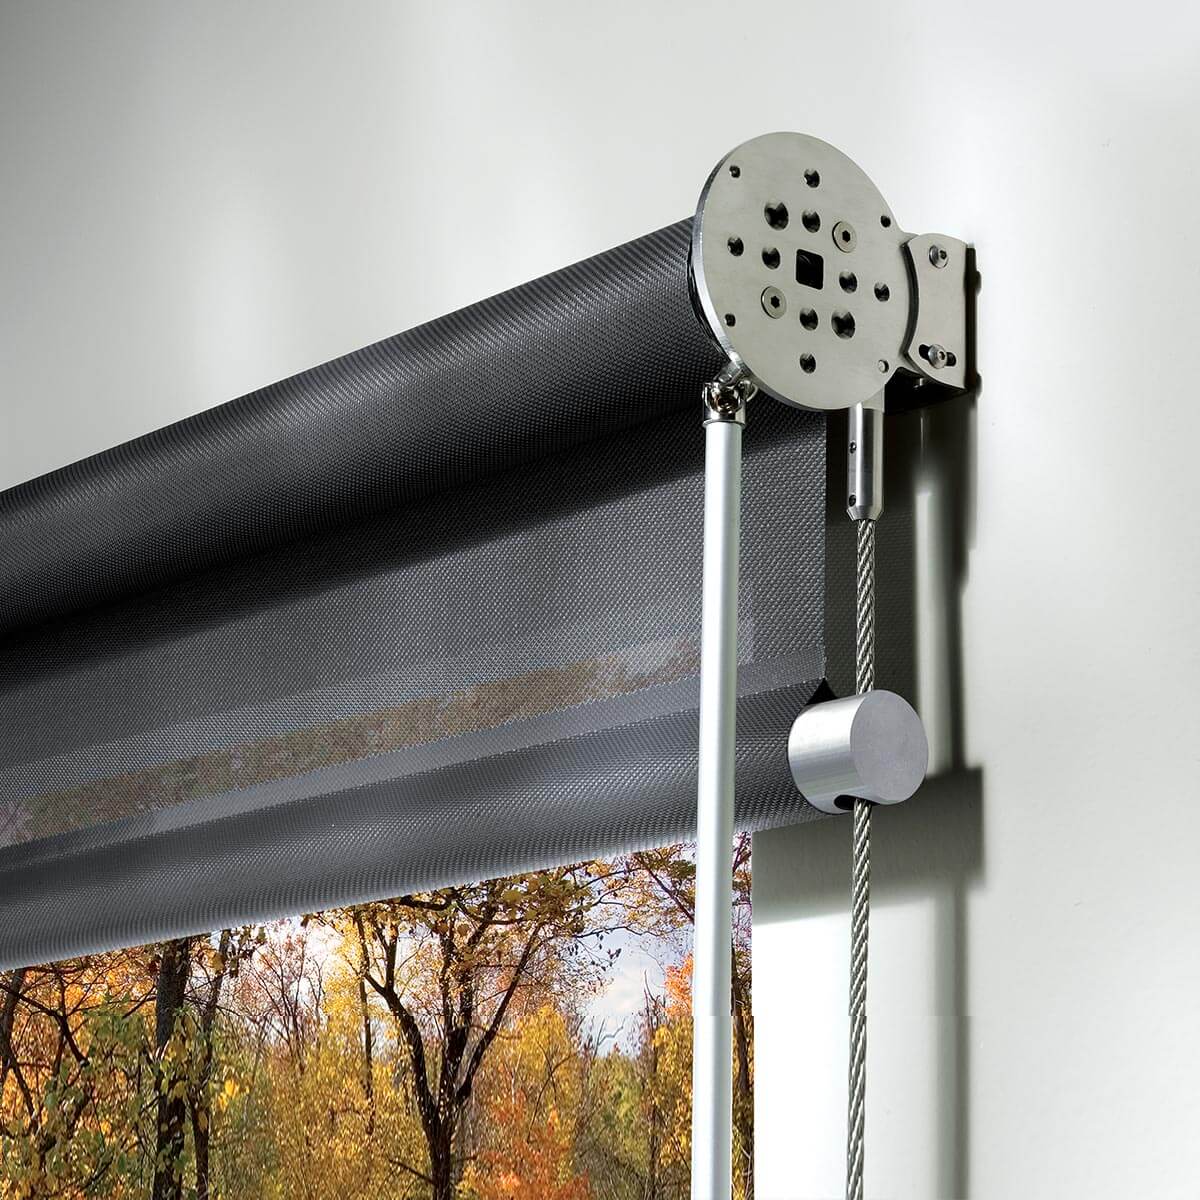 Winch-operated roller blind, Extra Large , Guide wires. Pronema